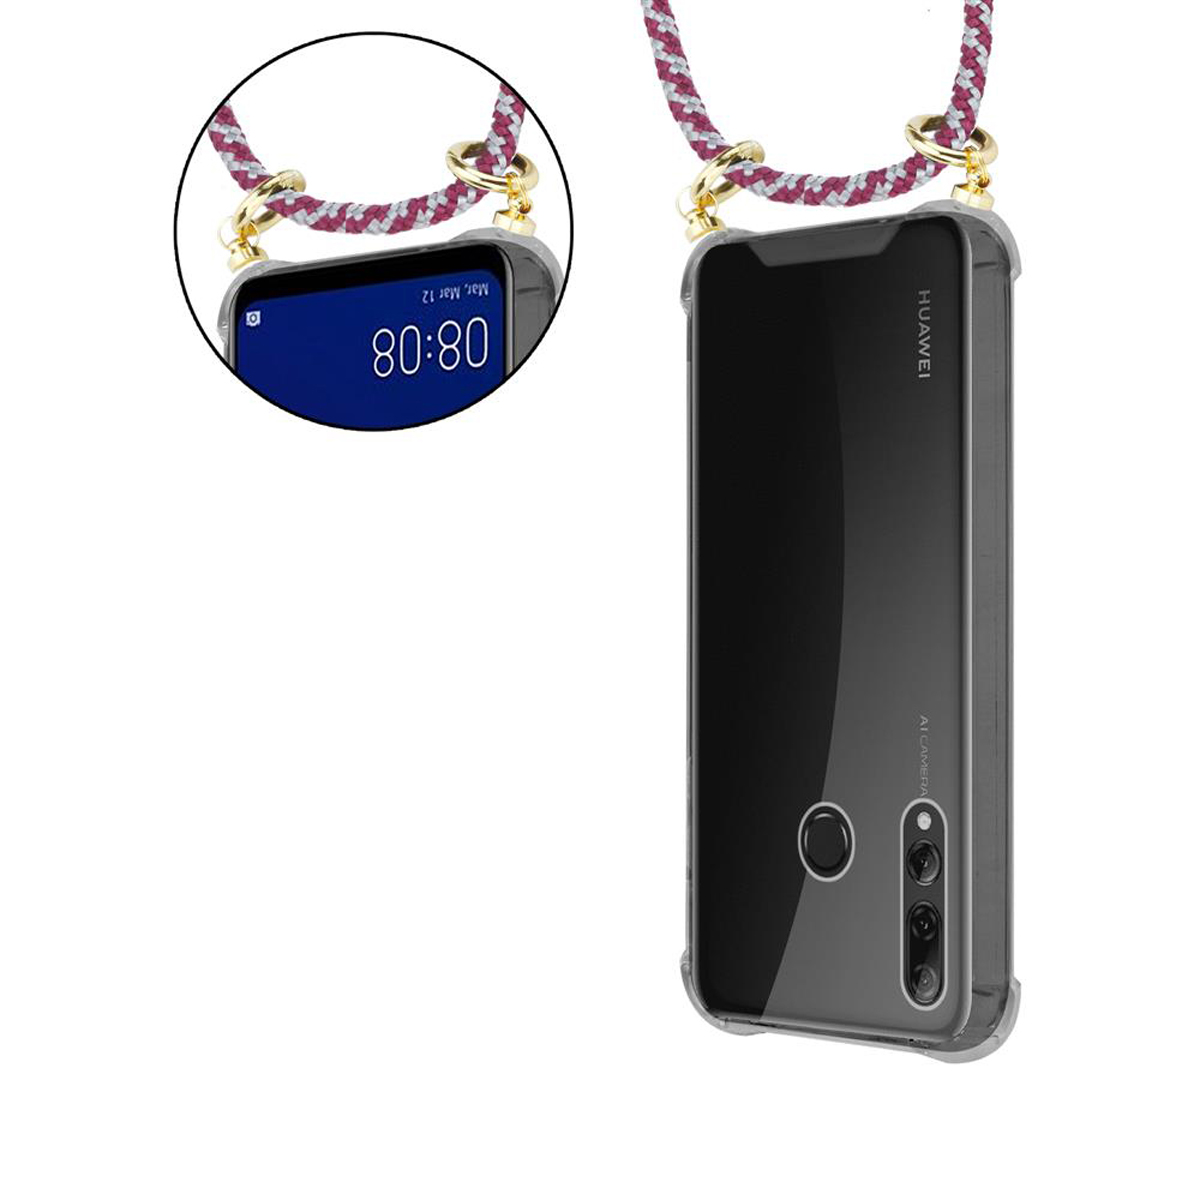 Kordel Gold 2019, und CADORABO Backcover, SMART Handy PLUS mit ROT P Band Huawei, Ringen, abnehmbarer Kette Hülle, WEIß